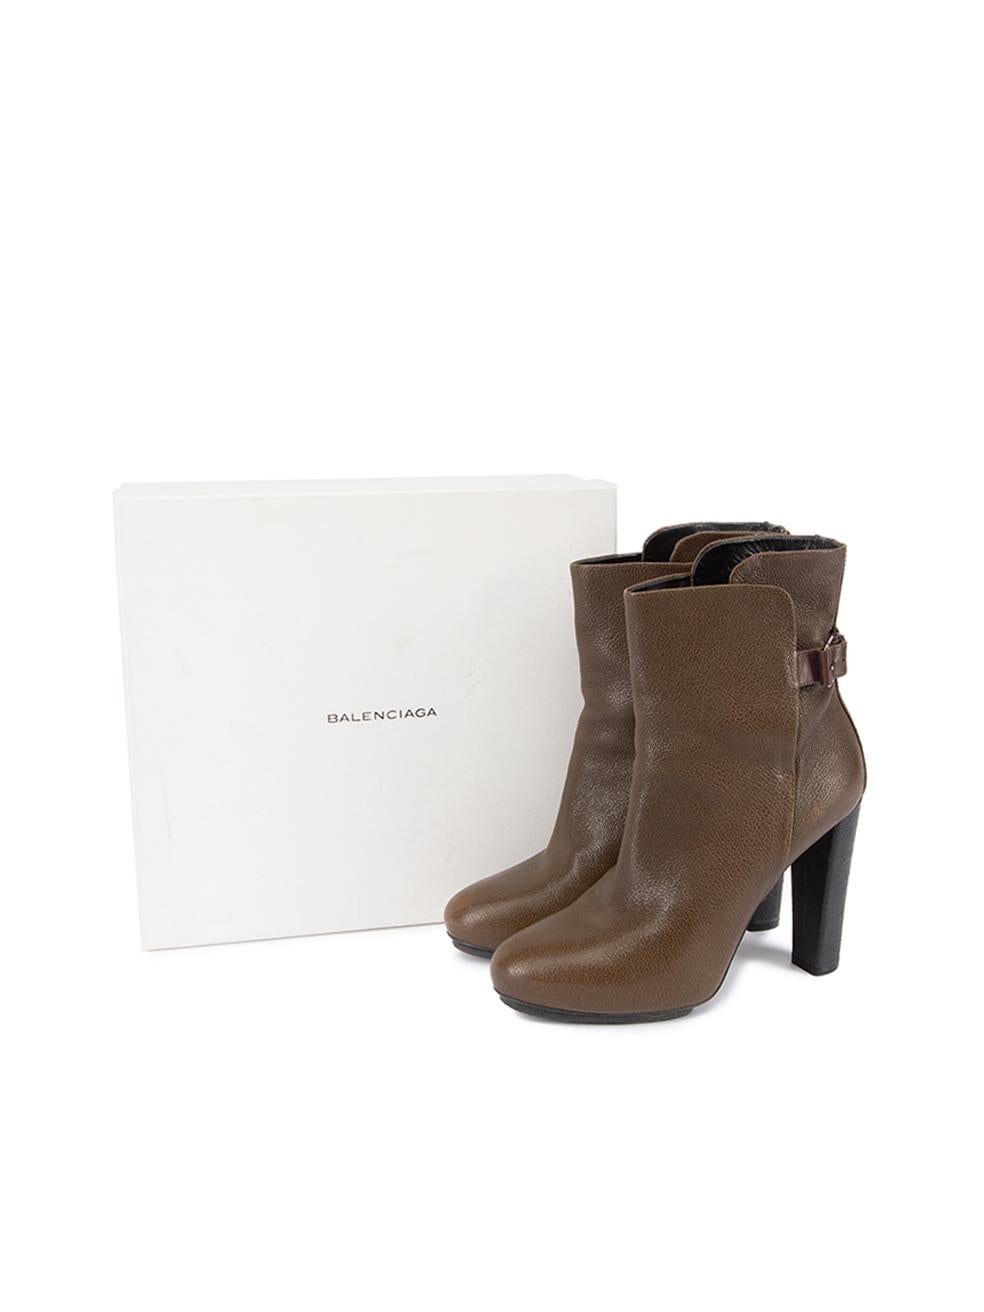 Balenciaga Women's Brown Buckle Accent Heeled Ankle Boots For Sale 2